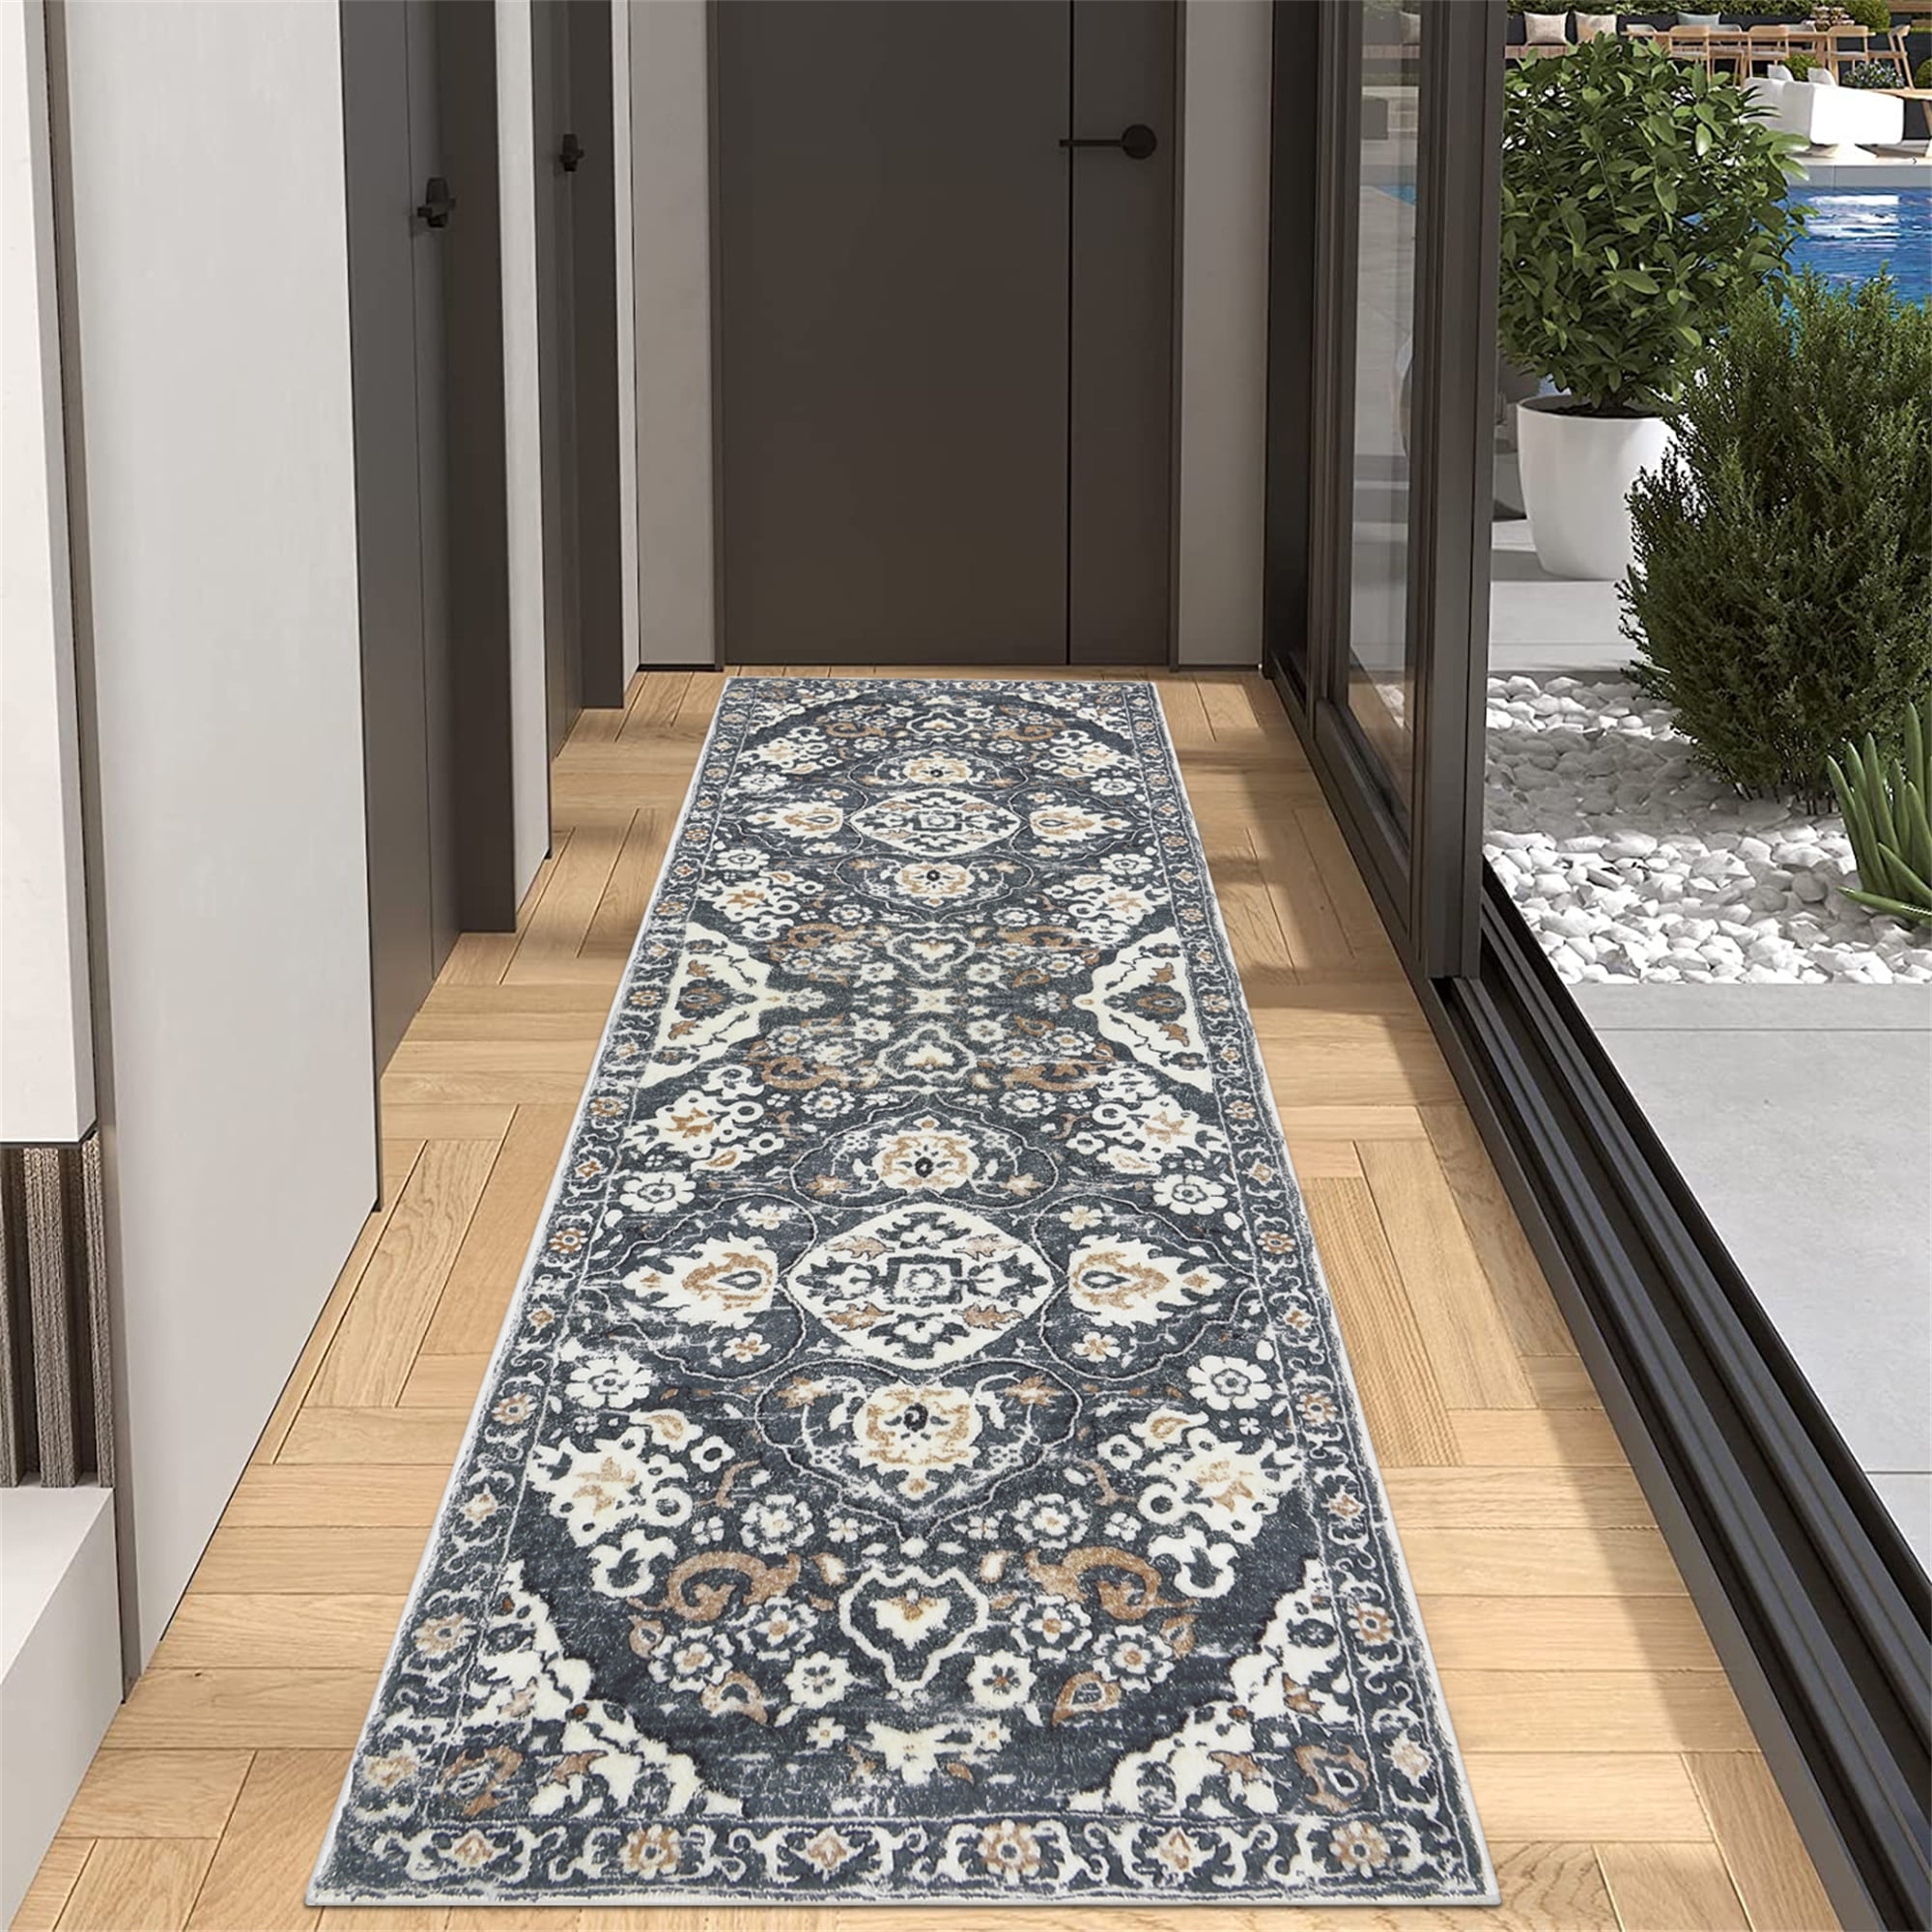 AYOHA Runner Rug 2' x 2' Indoor/Outdoor Carpet for Hallway Kitchen Entryway  Patio Lobby Garage Deck Area Rugs with Natural Non-Slip Rubber Backing